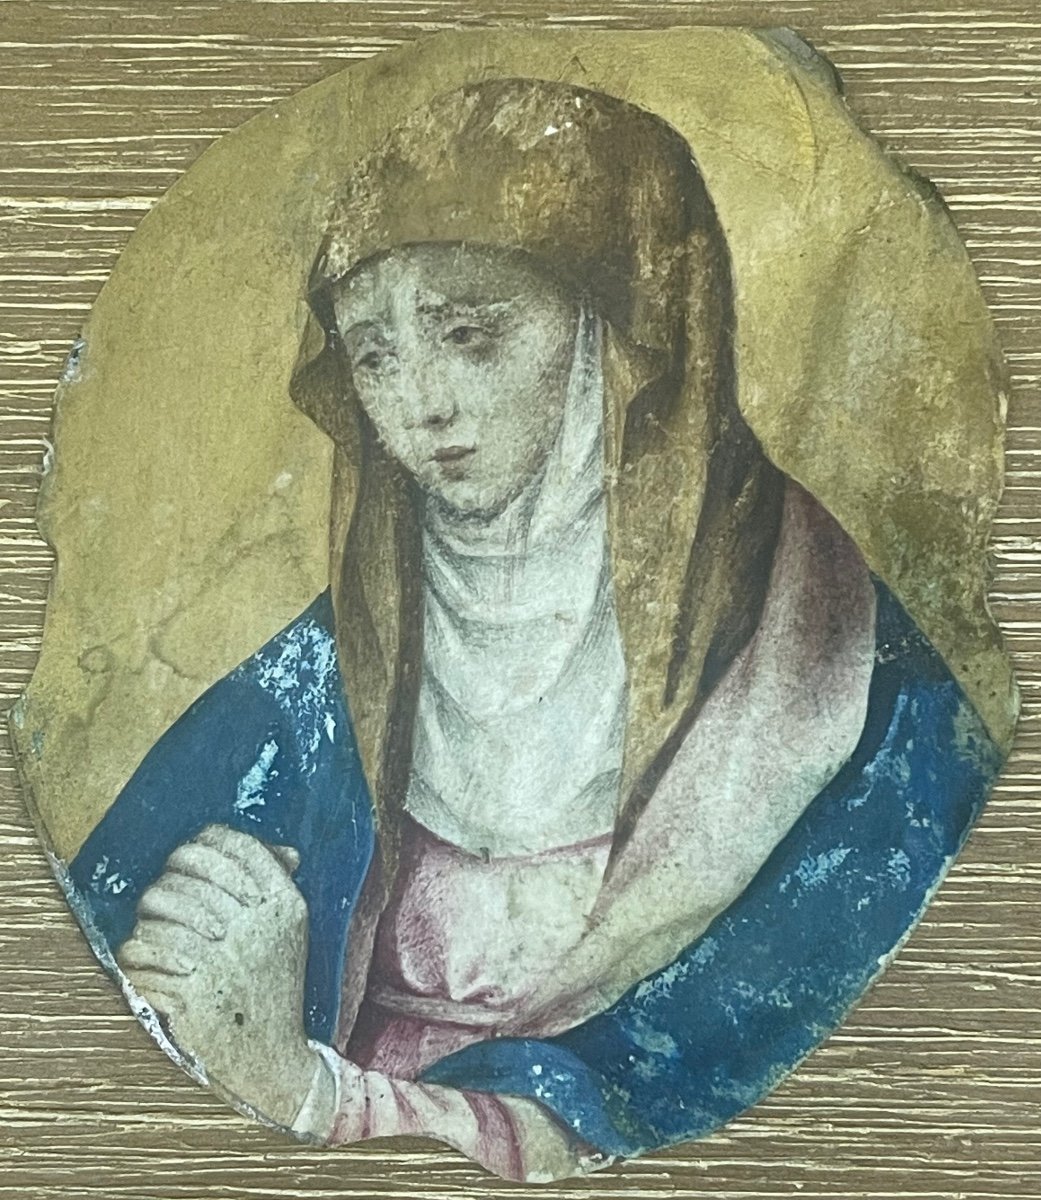 Virgin. Venetian School From The 16th Century. Parchment Or Vellum.